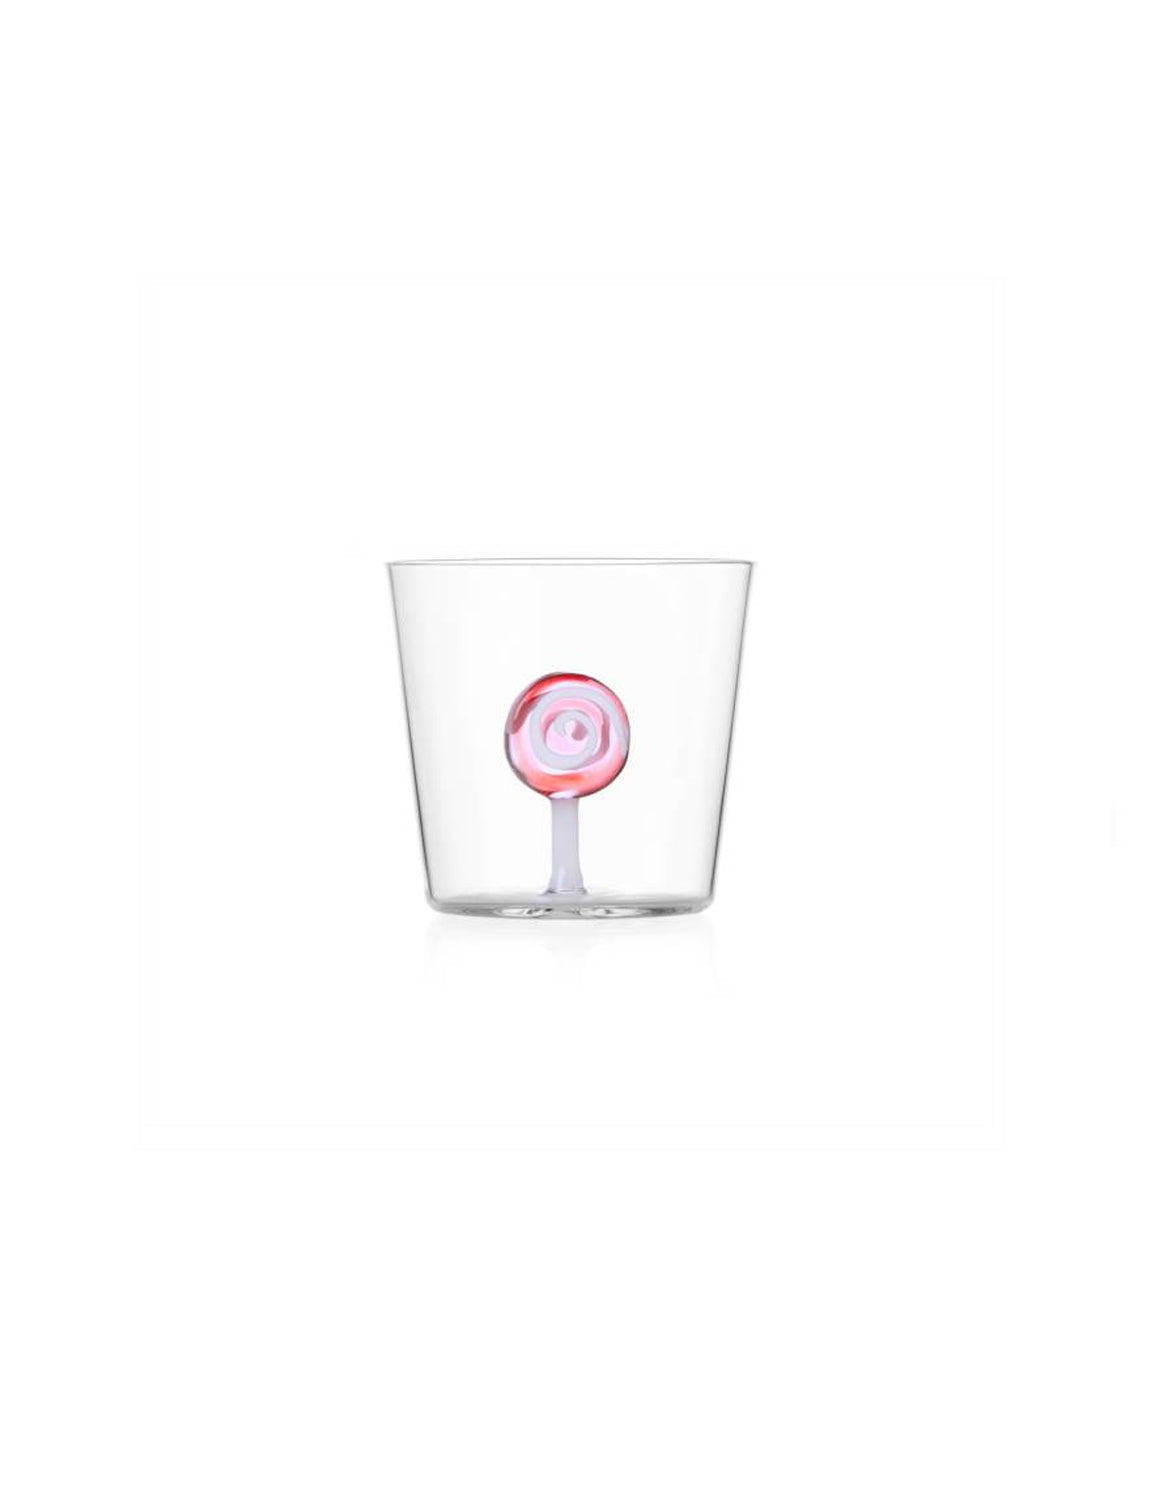 Ichendorf Sweet and Candy Tumbler, red lollipop